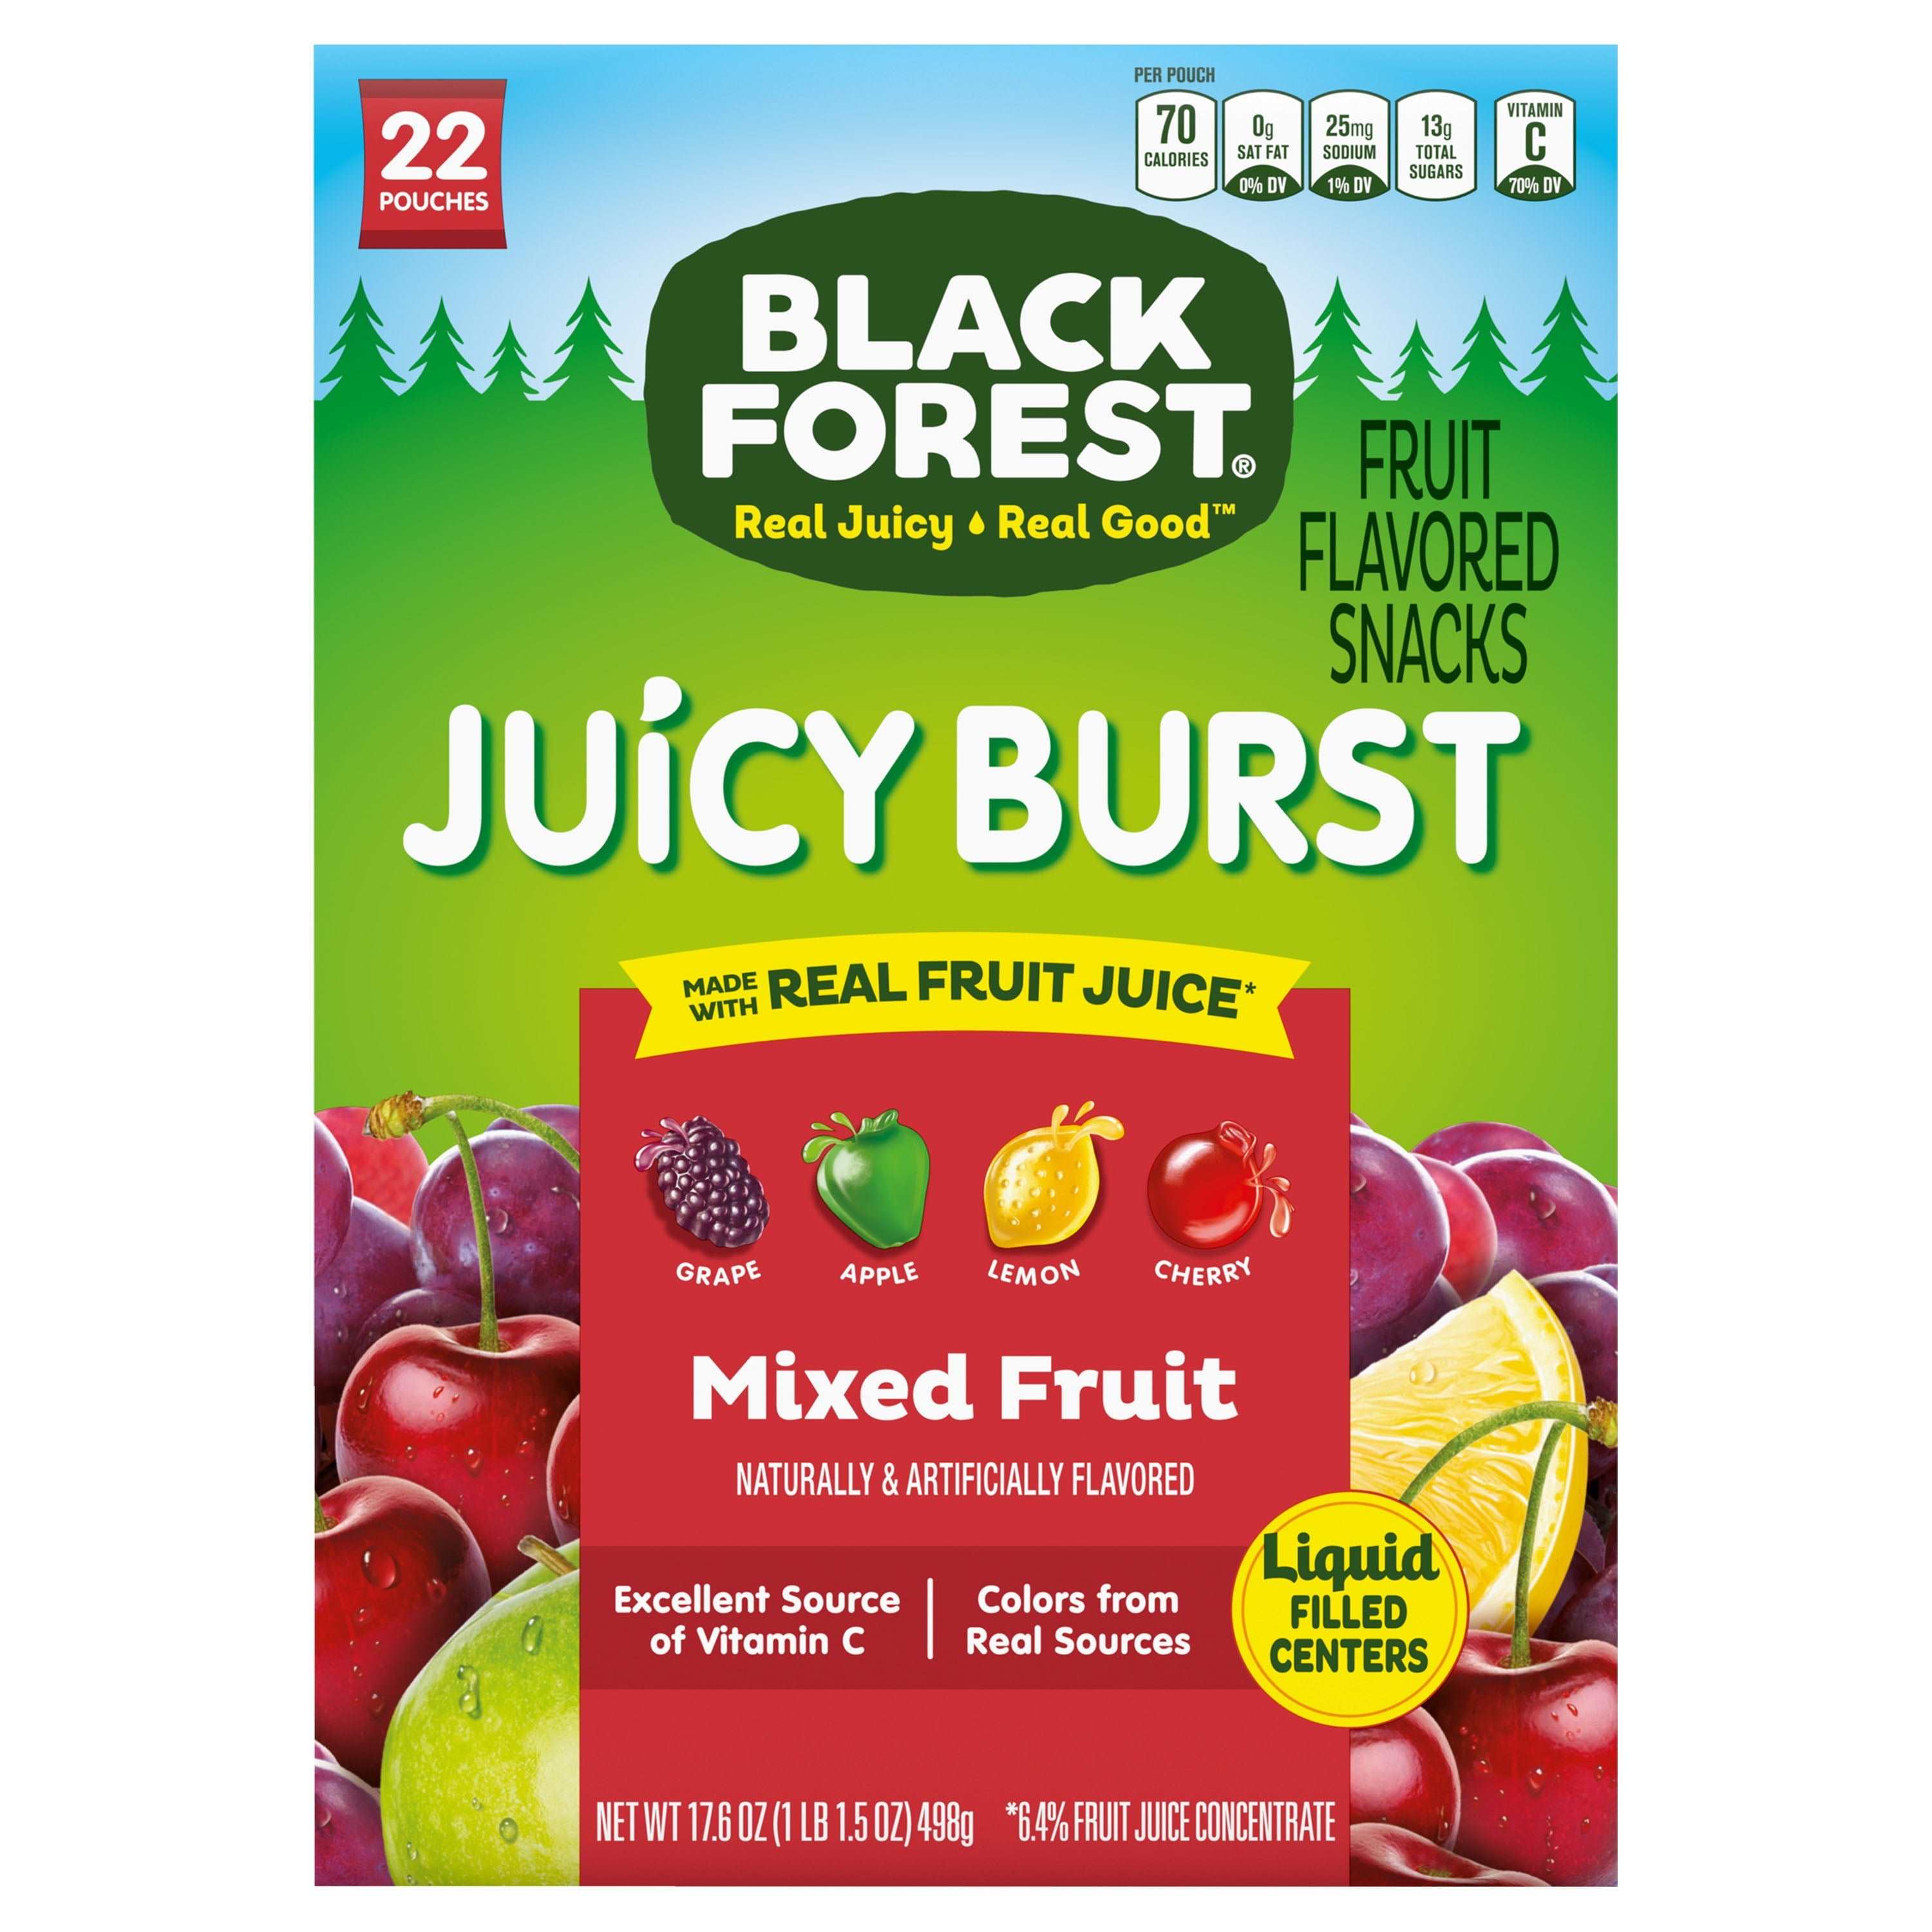 Wholesale prices with free shipping all over United States Black Forest Fruit Flavored Snacks Juicy Burst, Mixed Fruit, 17.6 oz Box, 22 Ct - Steven Deals